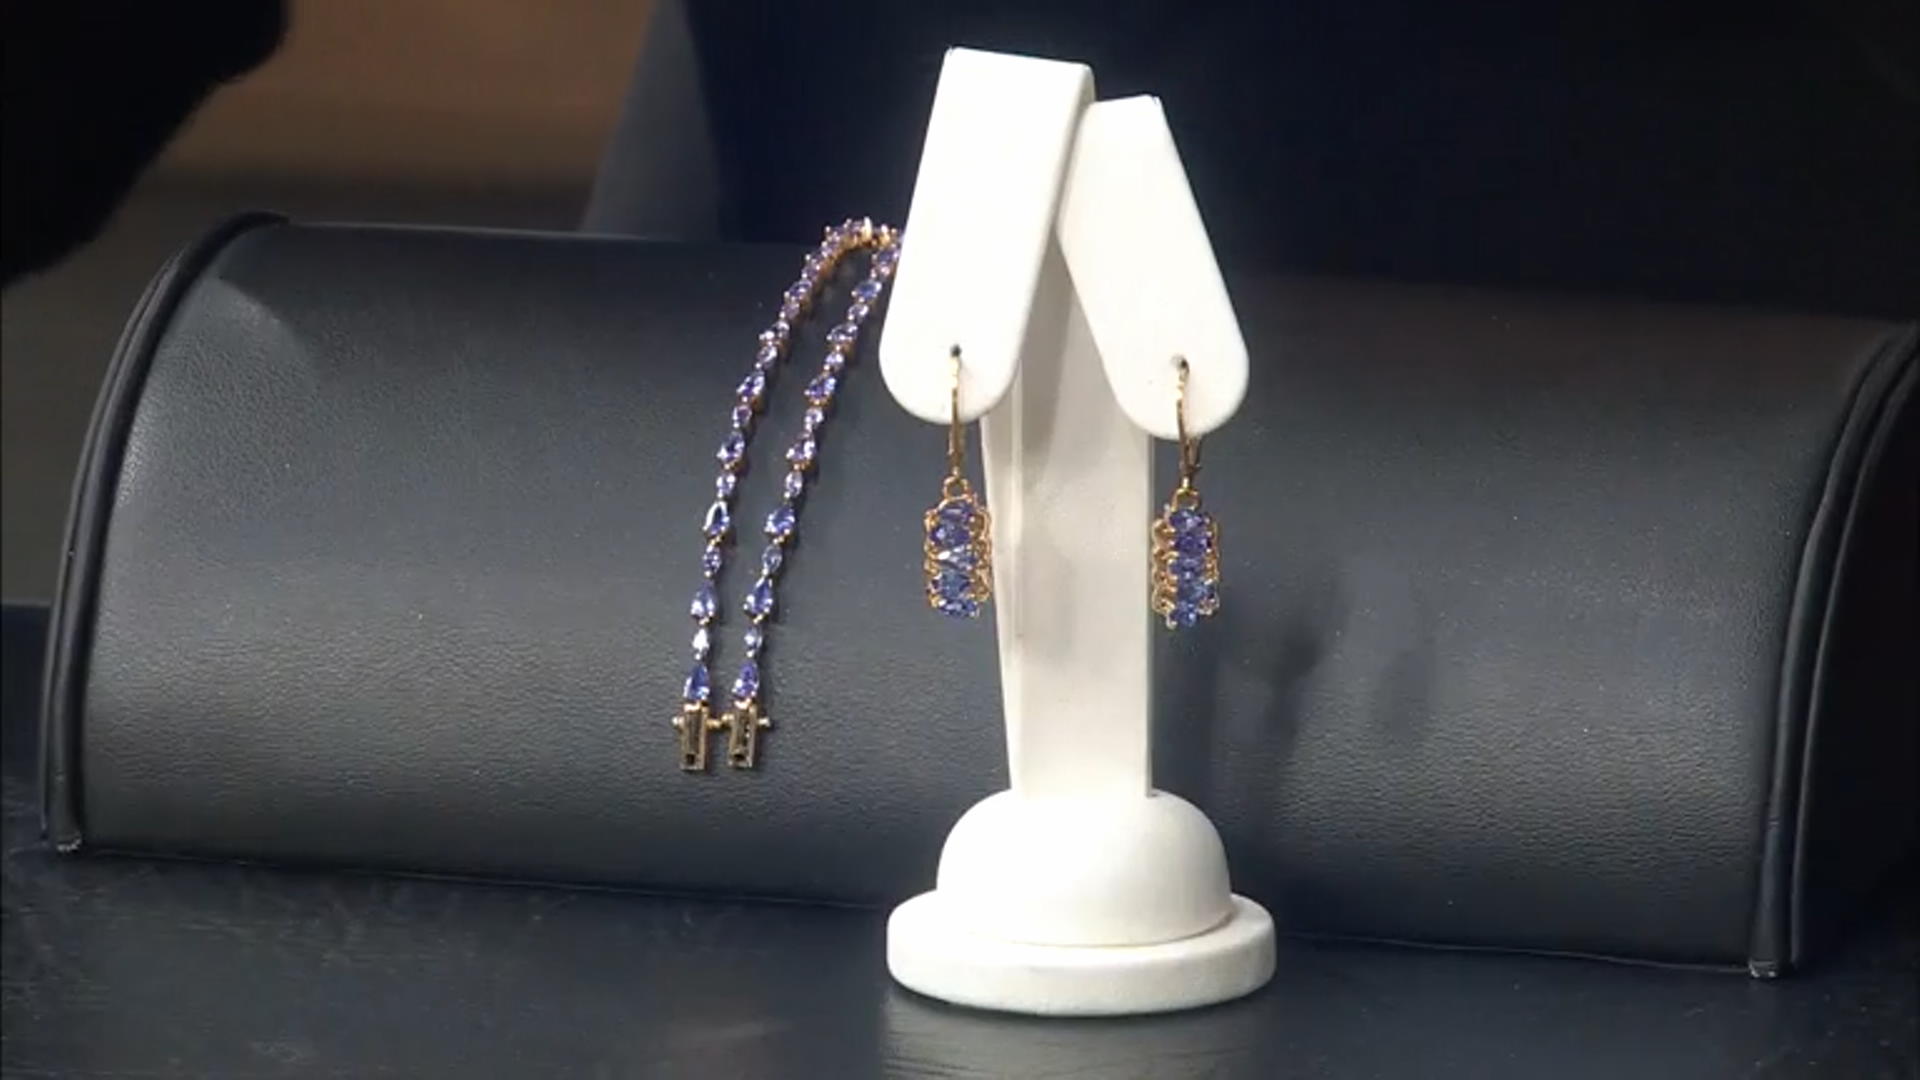 Blue Tanzanite 18k Yellow Gold Over Sterling Silver Dangle Earrings 1.96ctw Video Thumbnail